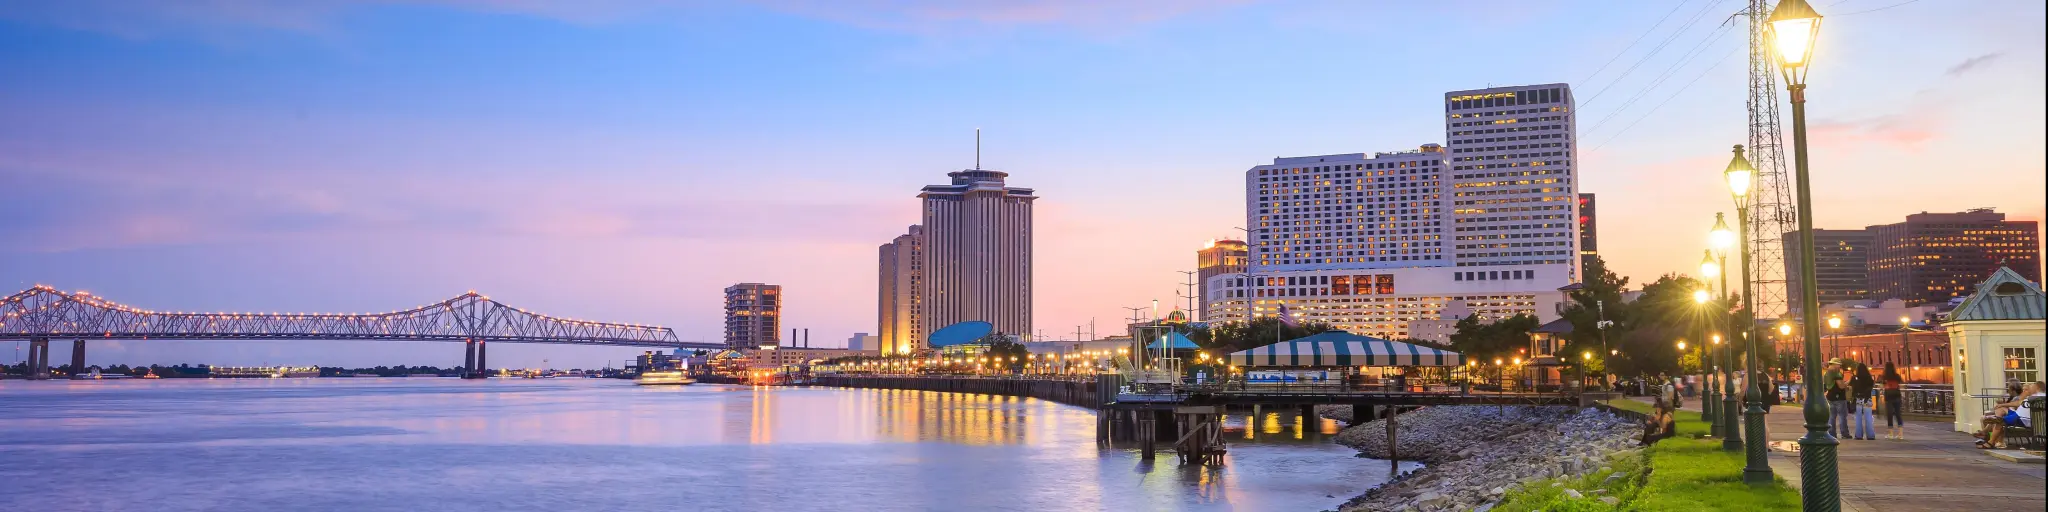 New Orleans, Louisiana, USA taken at the downtown city with the Missisippi River at twilight.